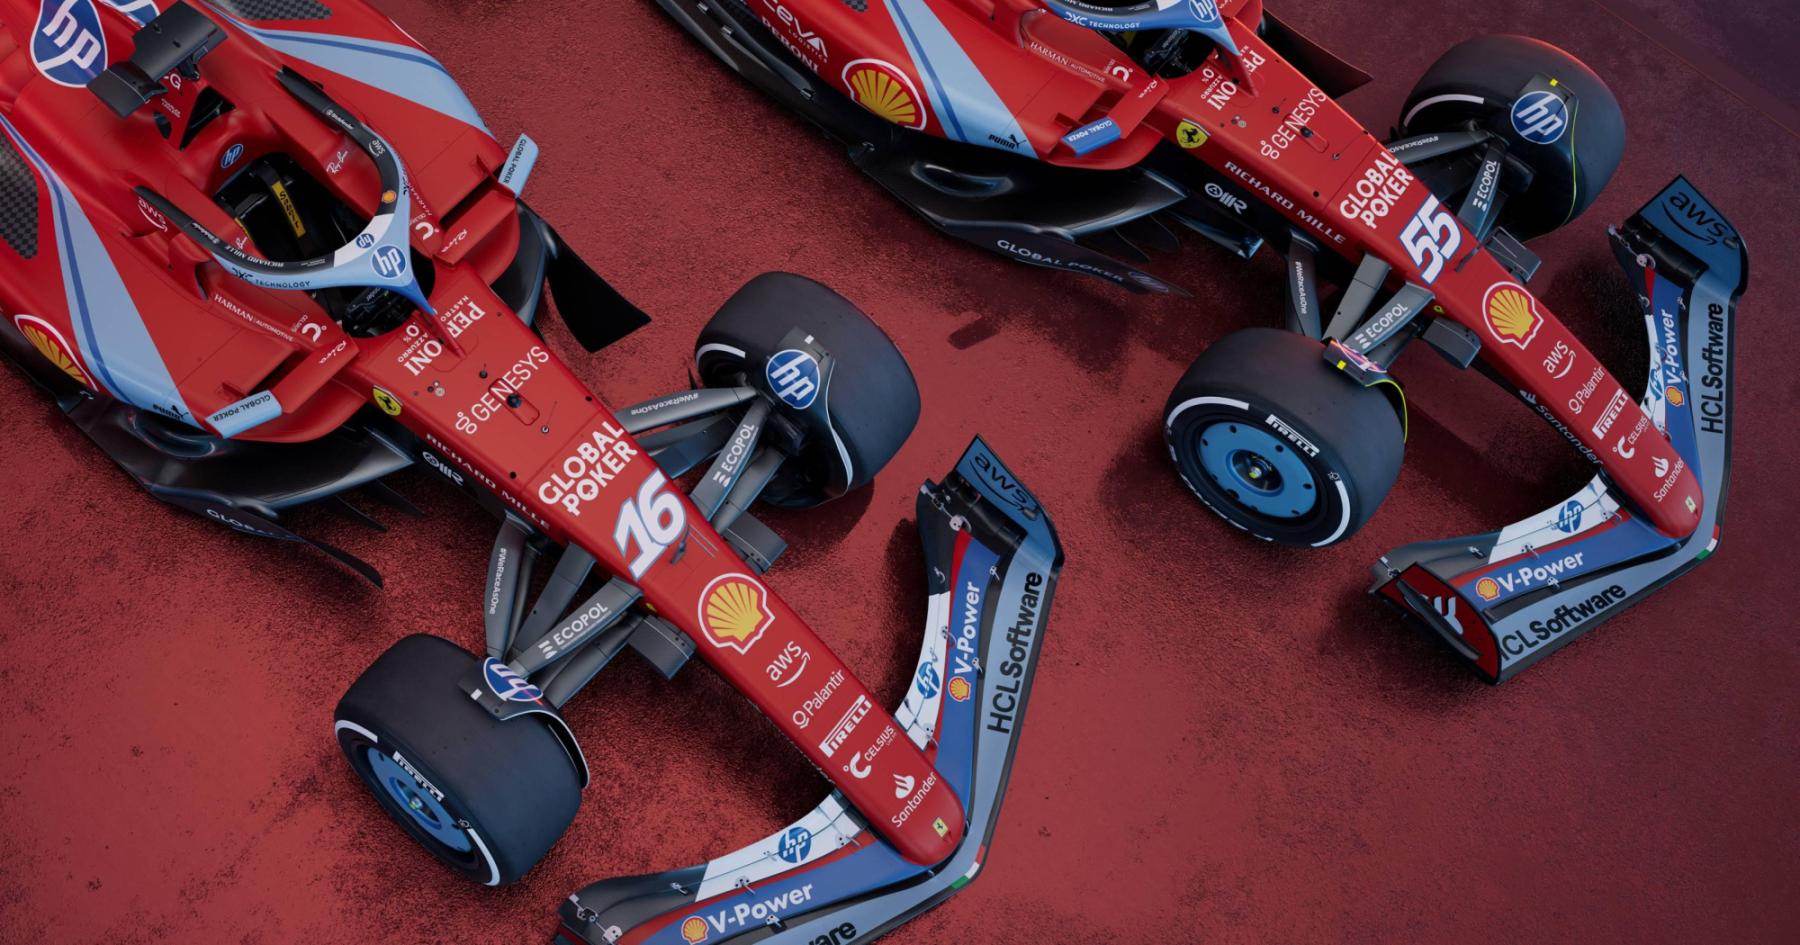 Speed and Style: Ferrari's Striking Blue Livery Steals the Show at Miami Grand Prix